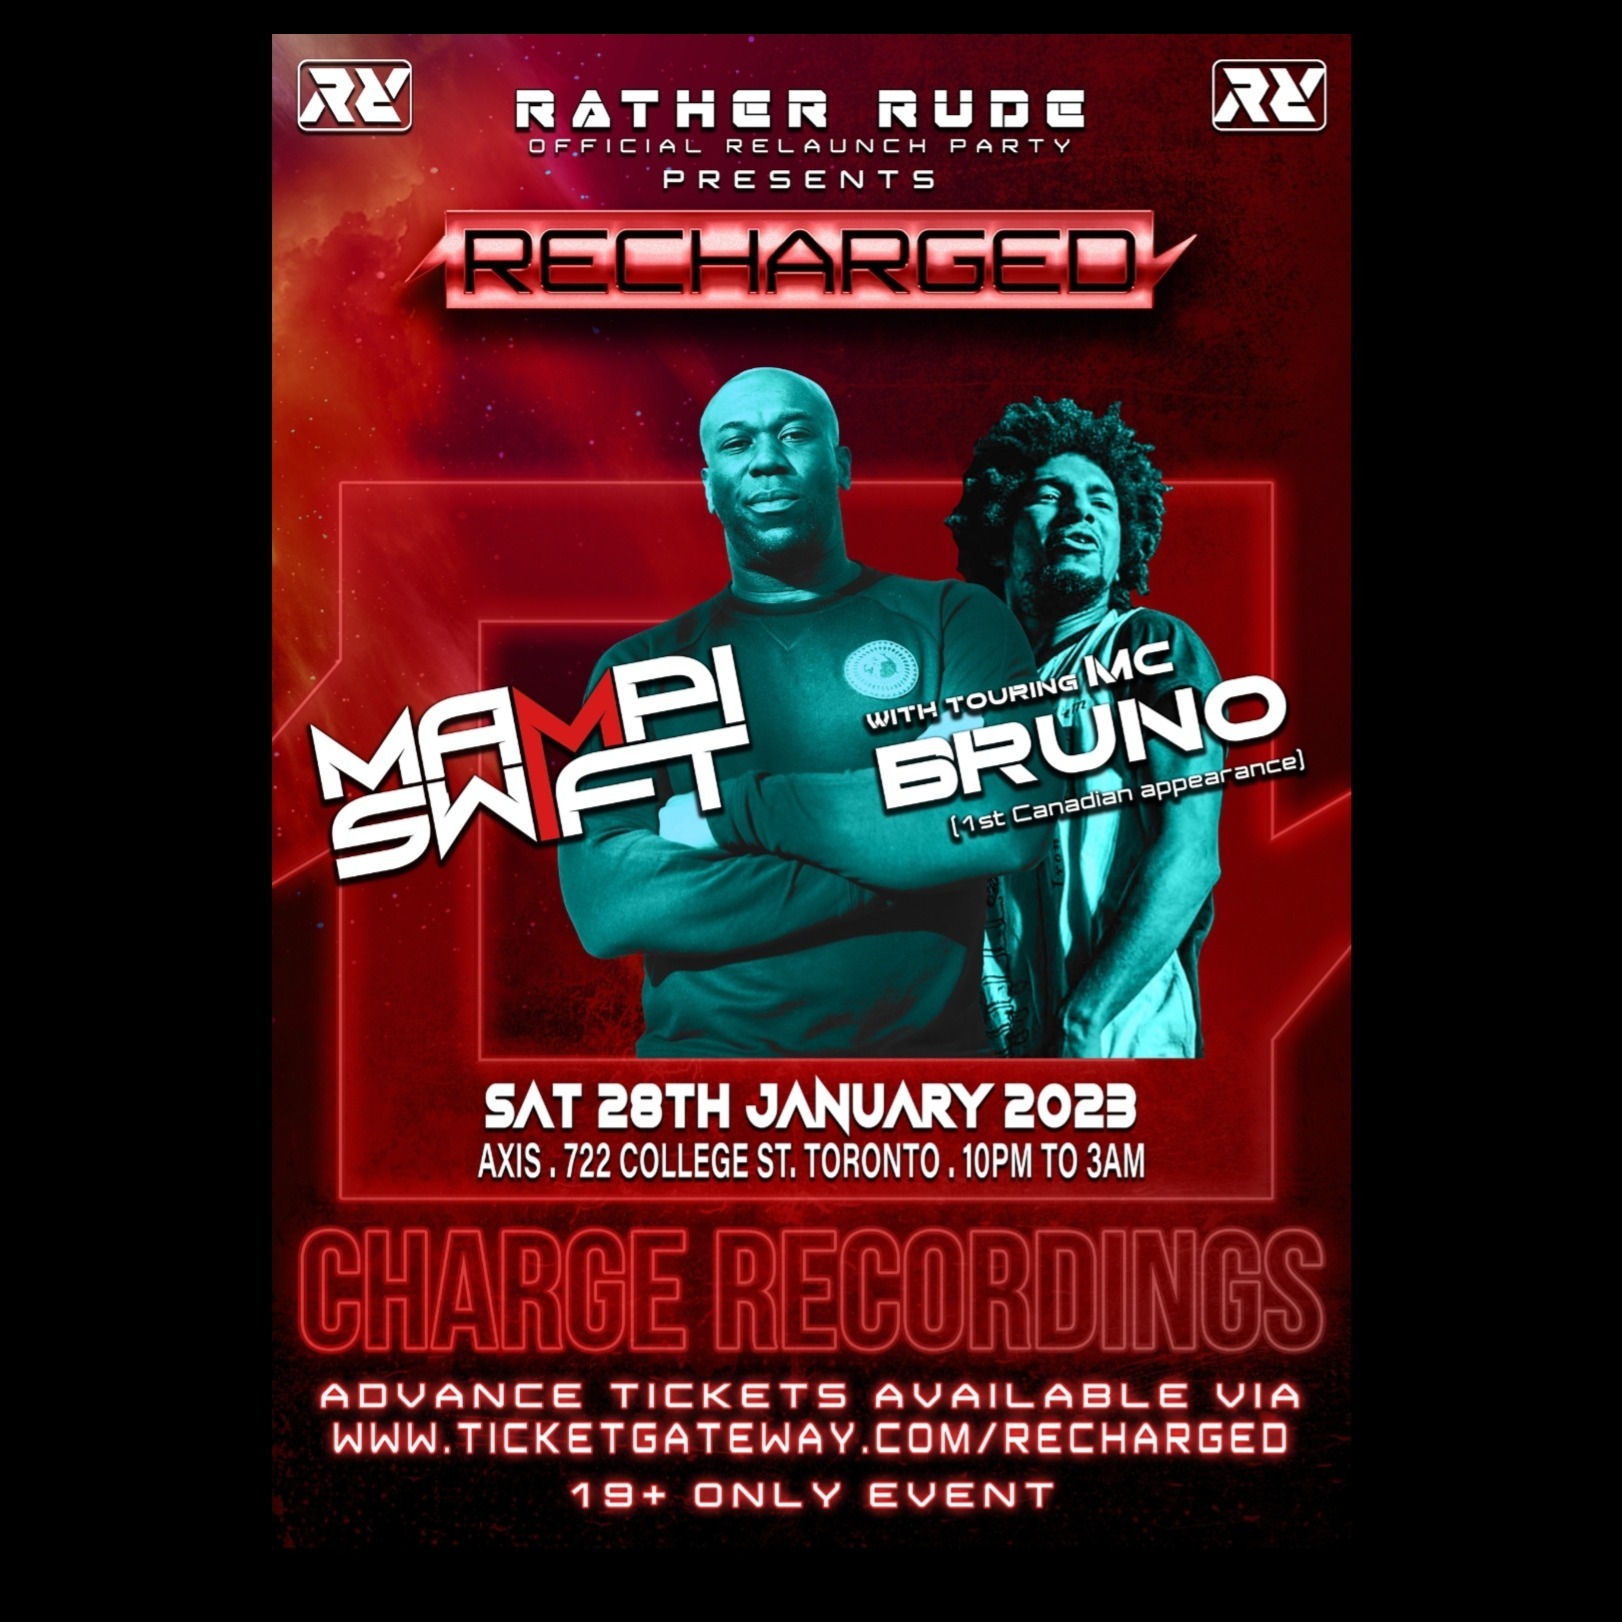 Rather Rude Presents - Re-Charged featuring Mampi Swift and Mc Bruno